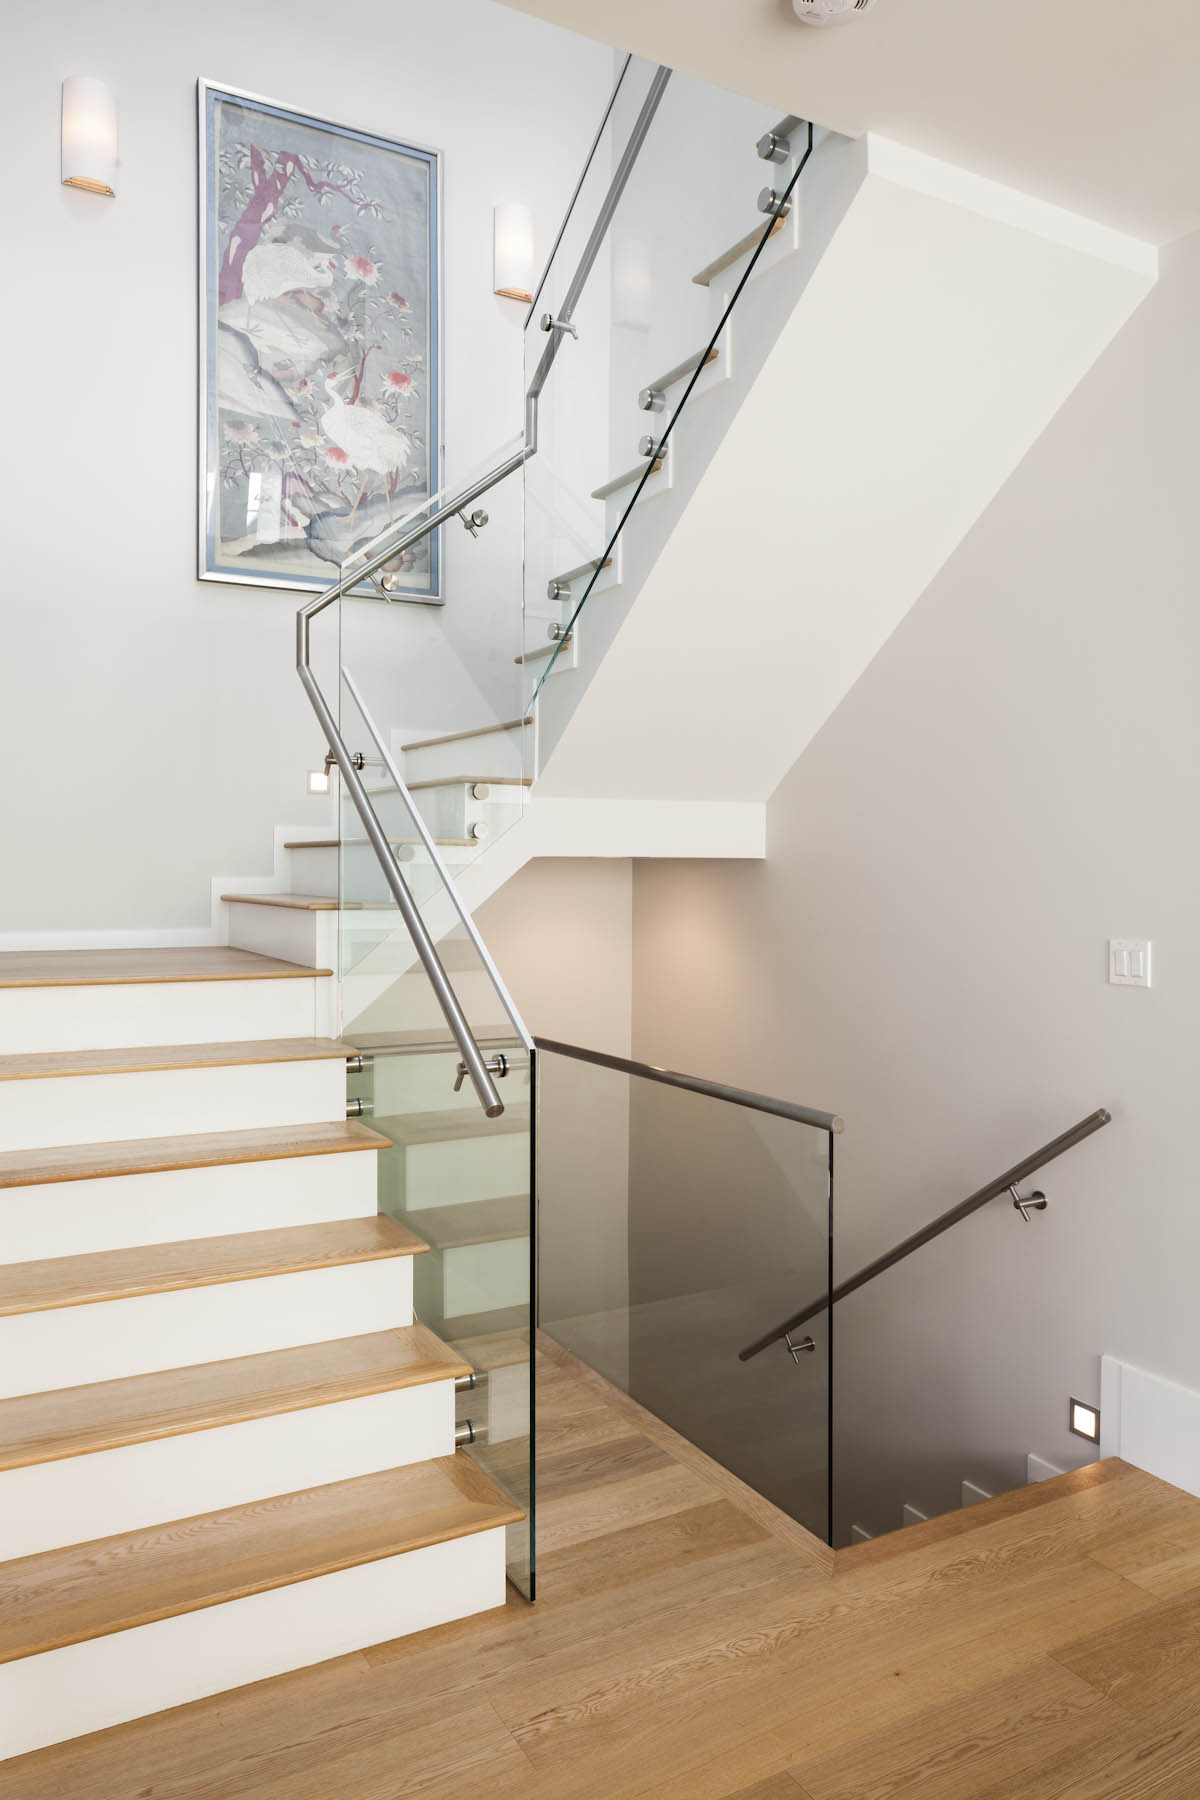 Interior glass-sided stairs with white walls at the Cambie Corridor custom house.